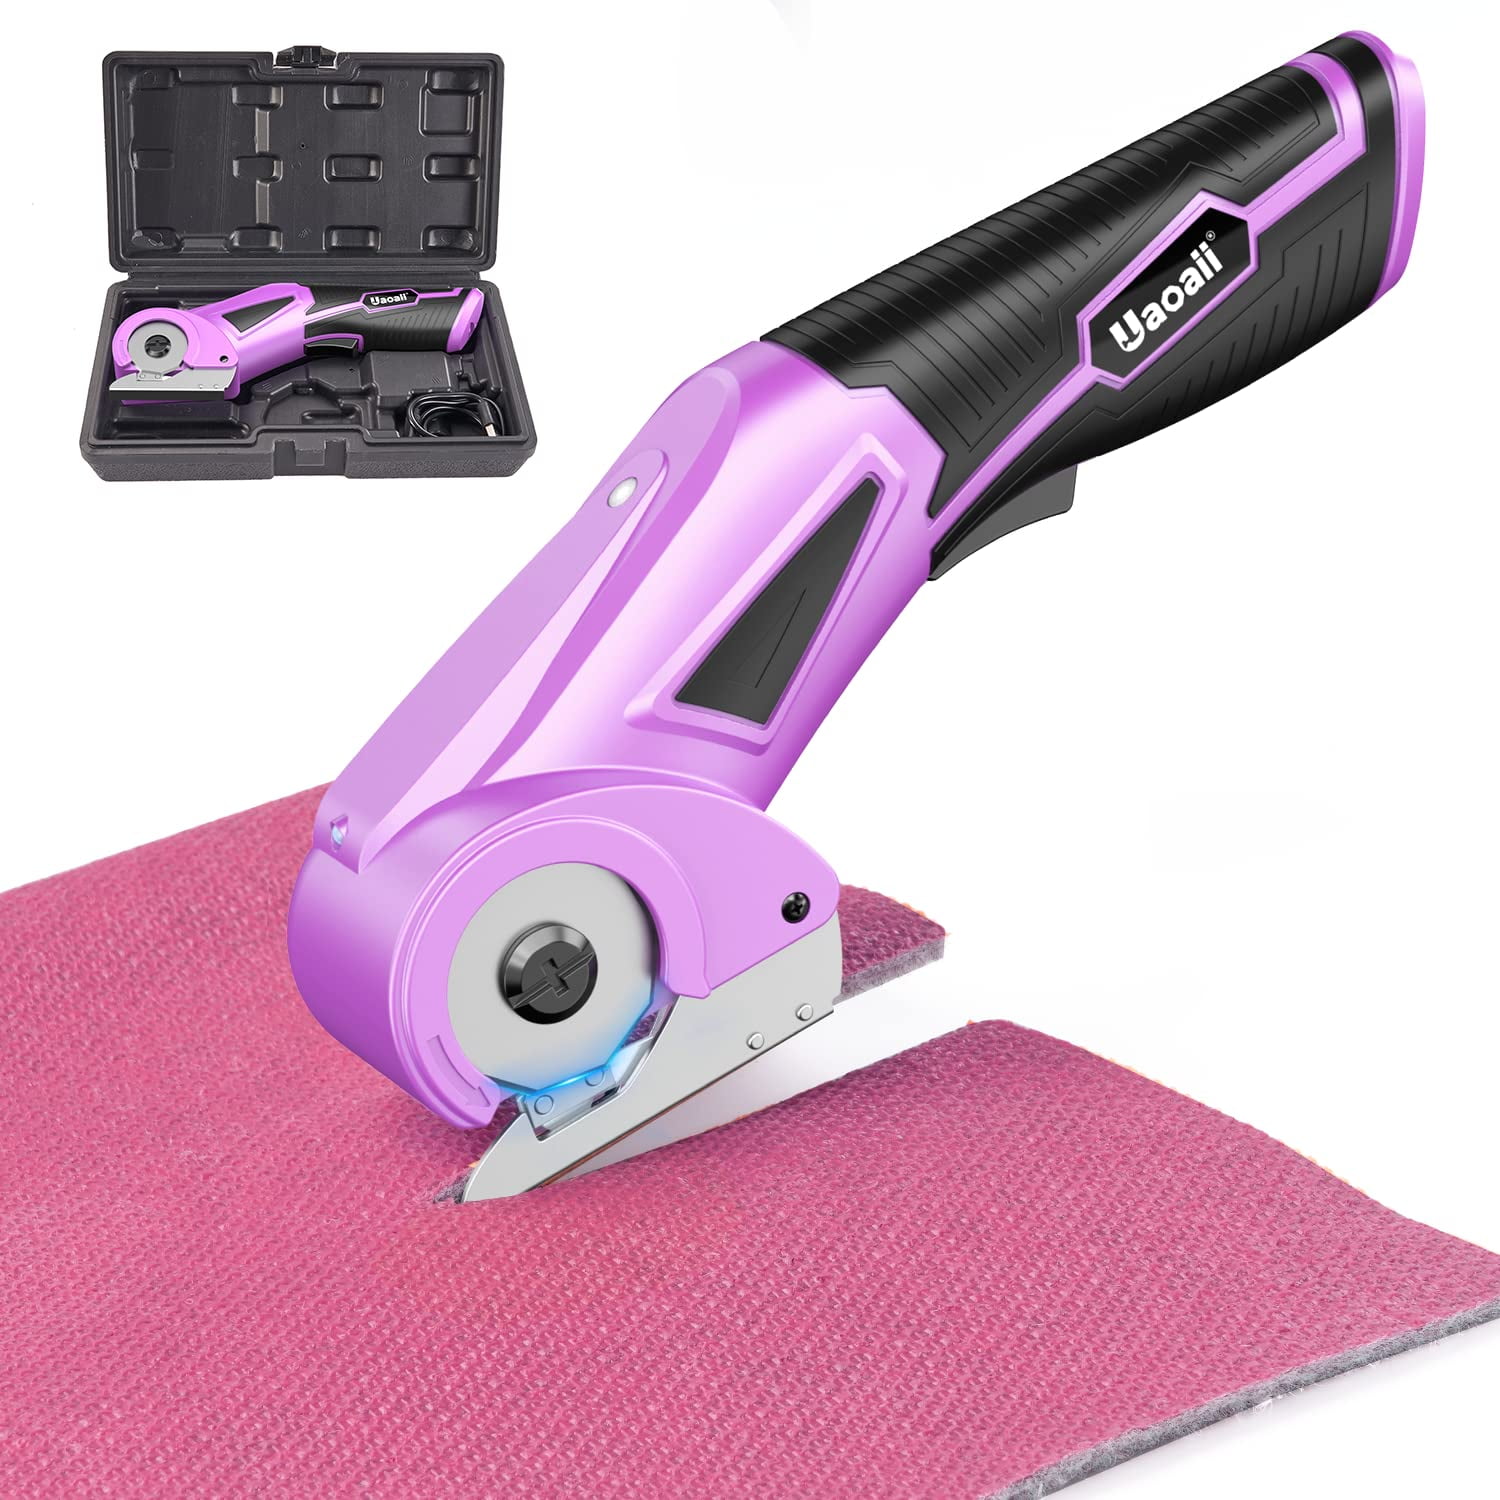 Consew 503K Tuffy Portable Electric Rotary Shear / Handheld Fabric Cutter -  Cutex Sewing Supplies